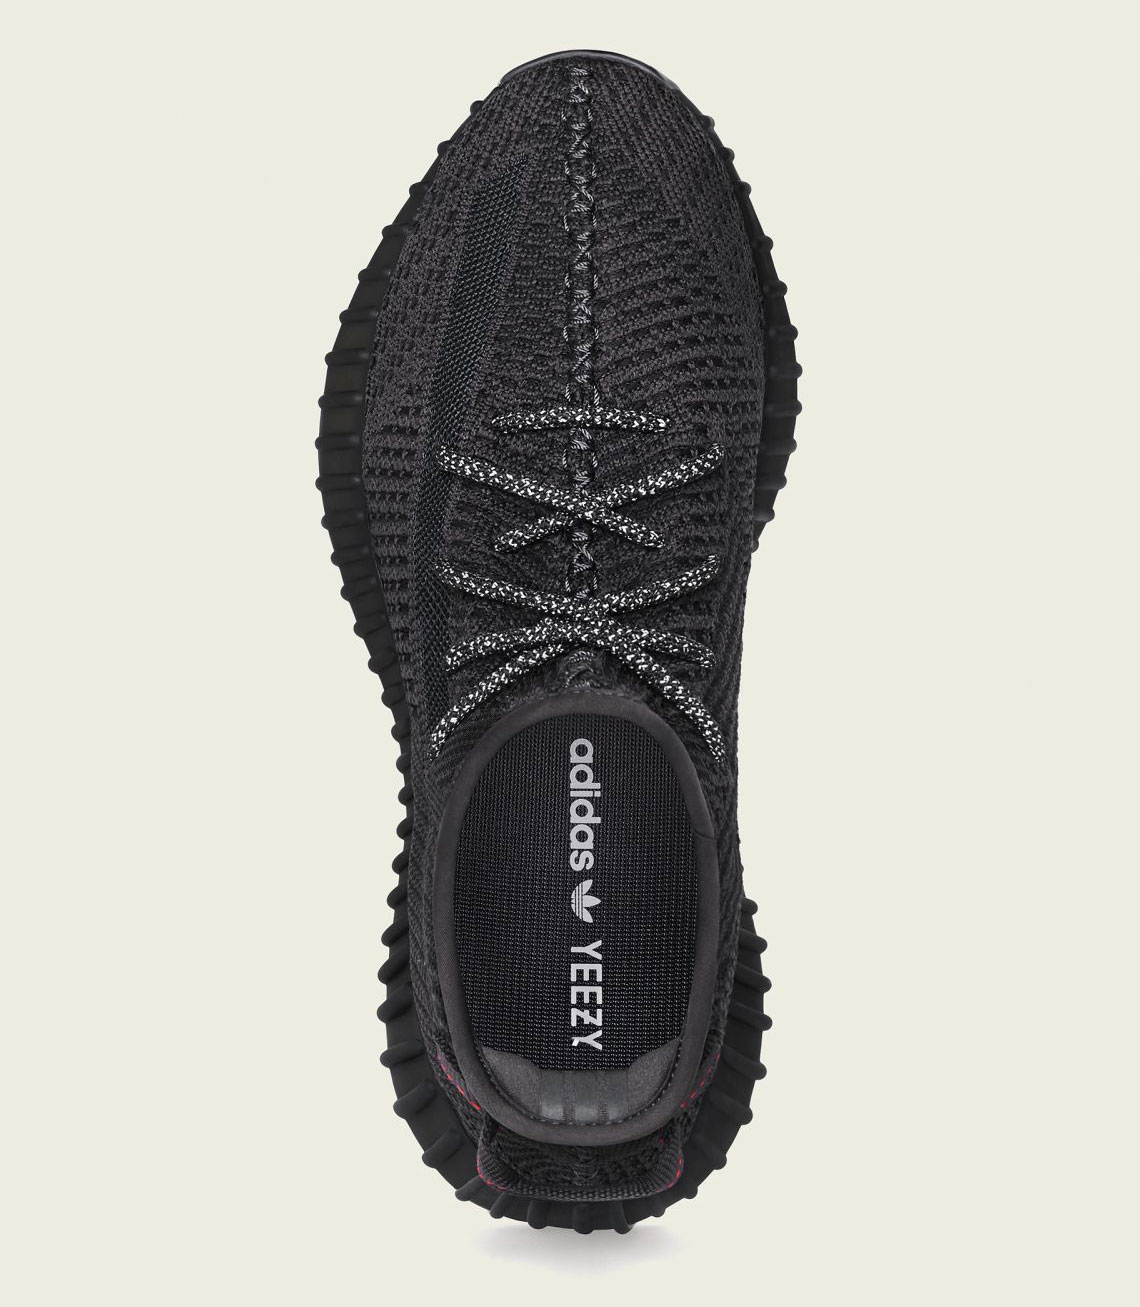 yeezy boost 350 v2 pirate black release date